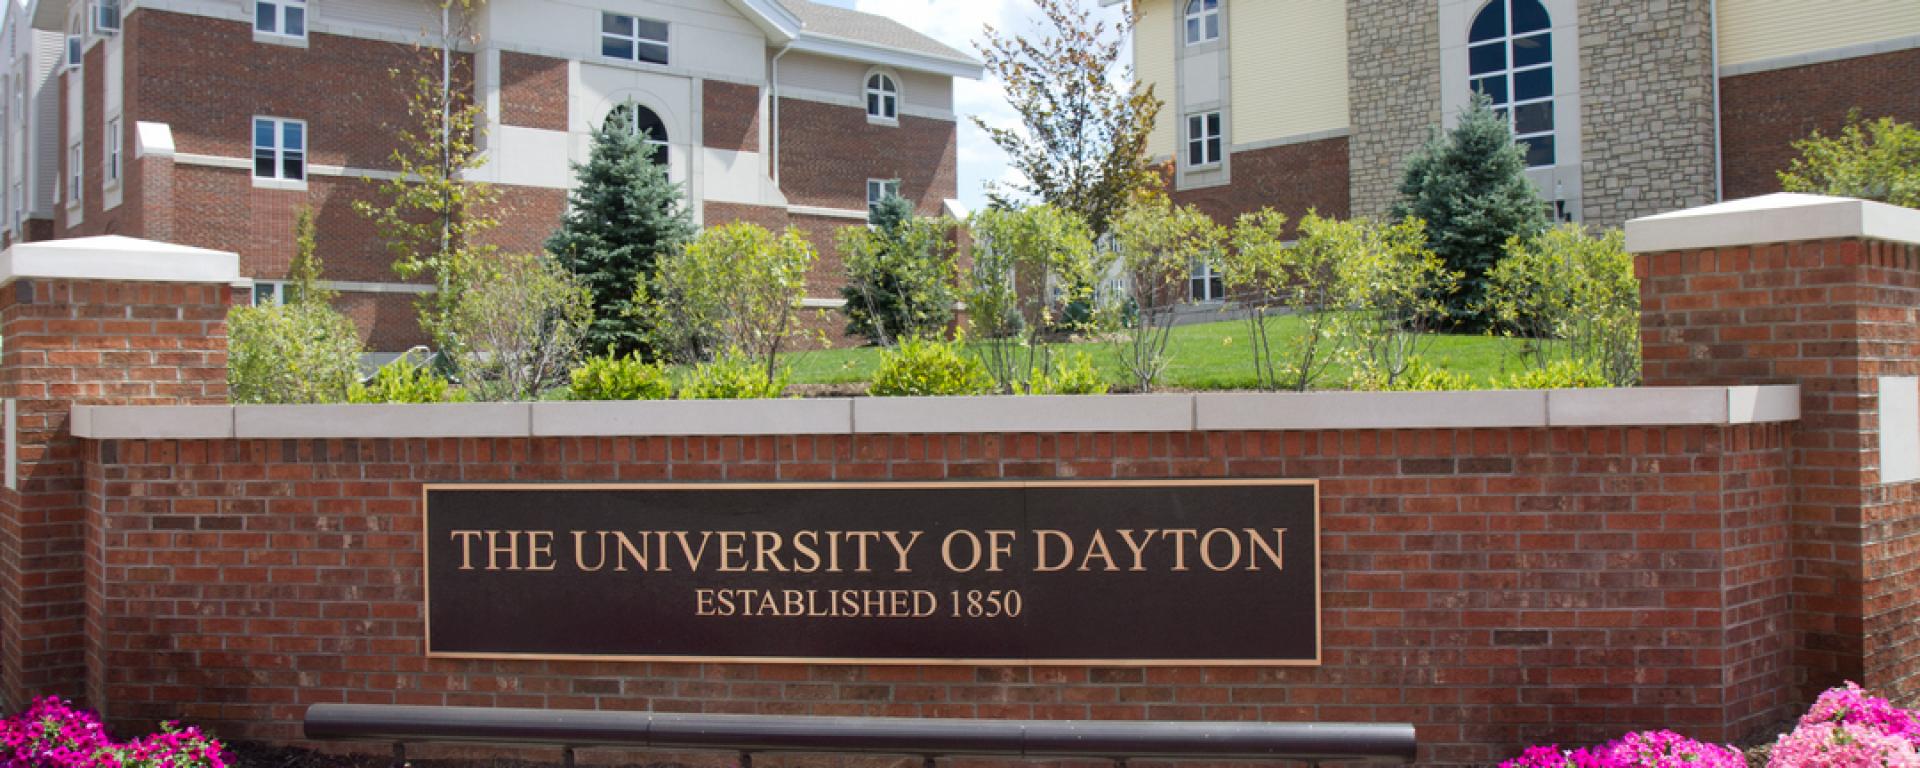 University of Dayton Caldwell and Brown Apartments